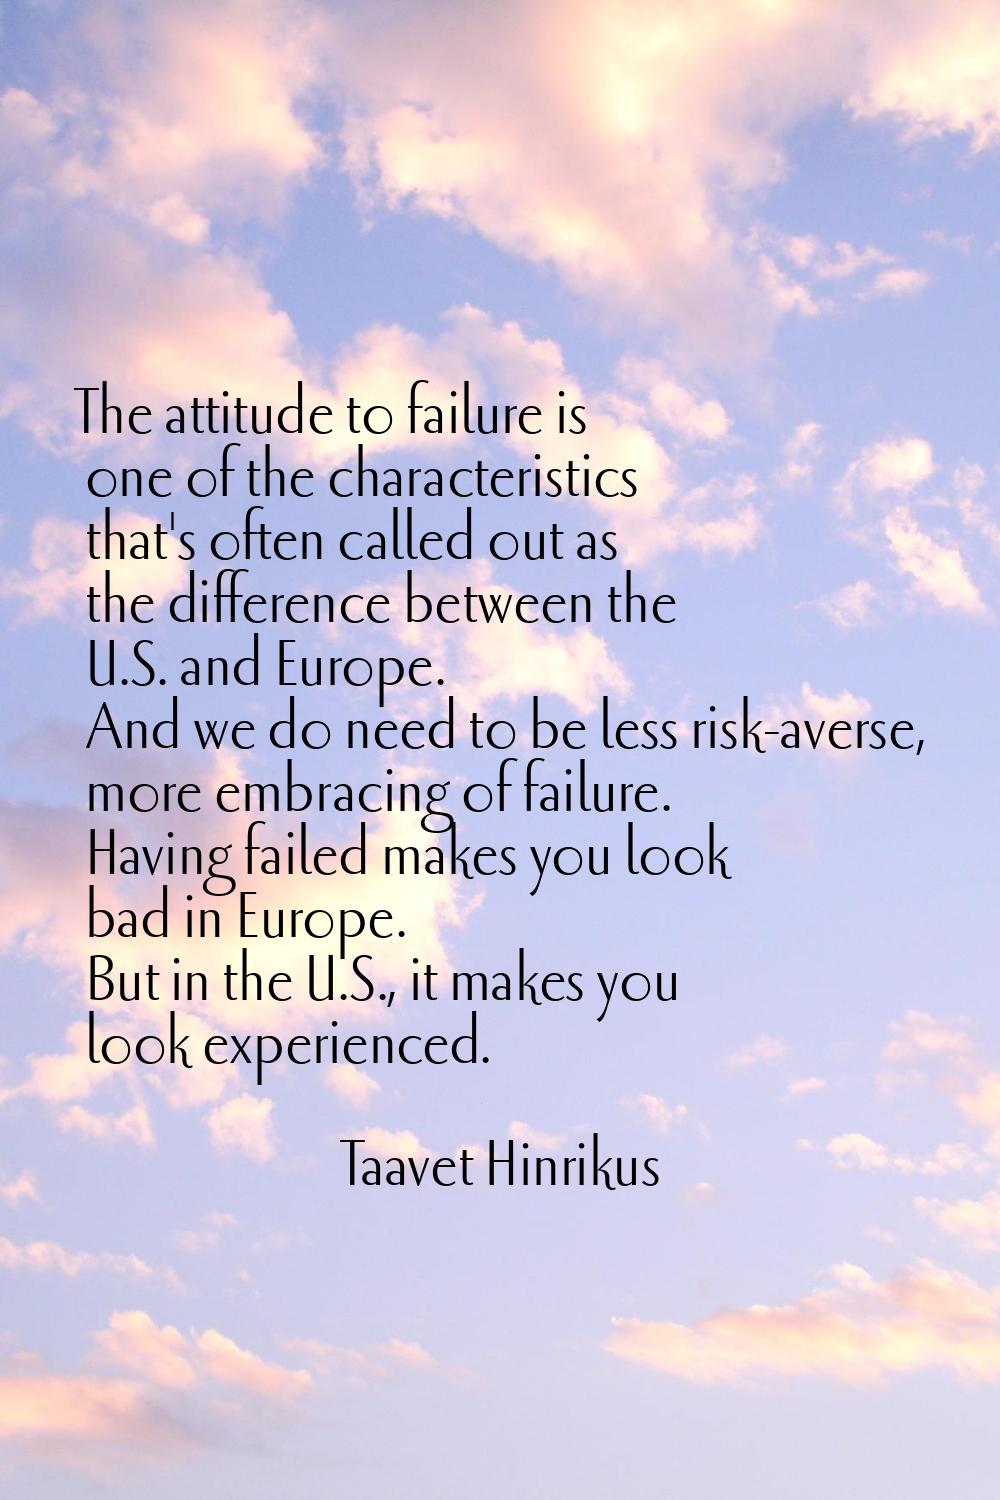 The attitude to failure is one of the characteristics that's often called out as the difference bet